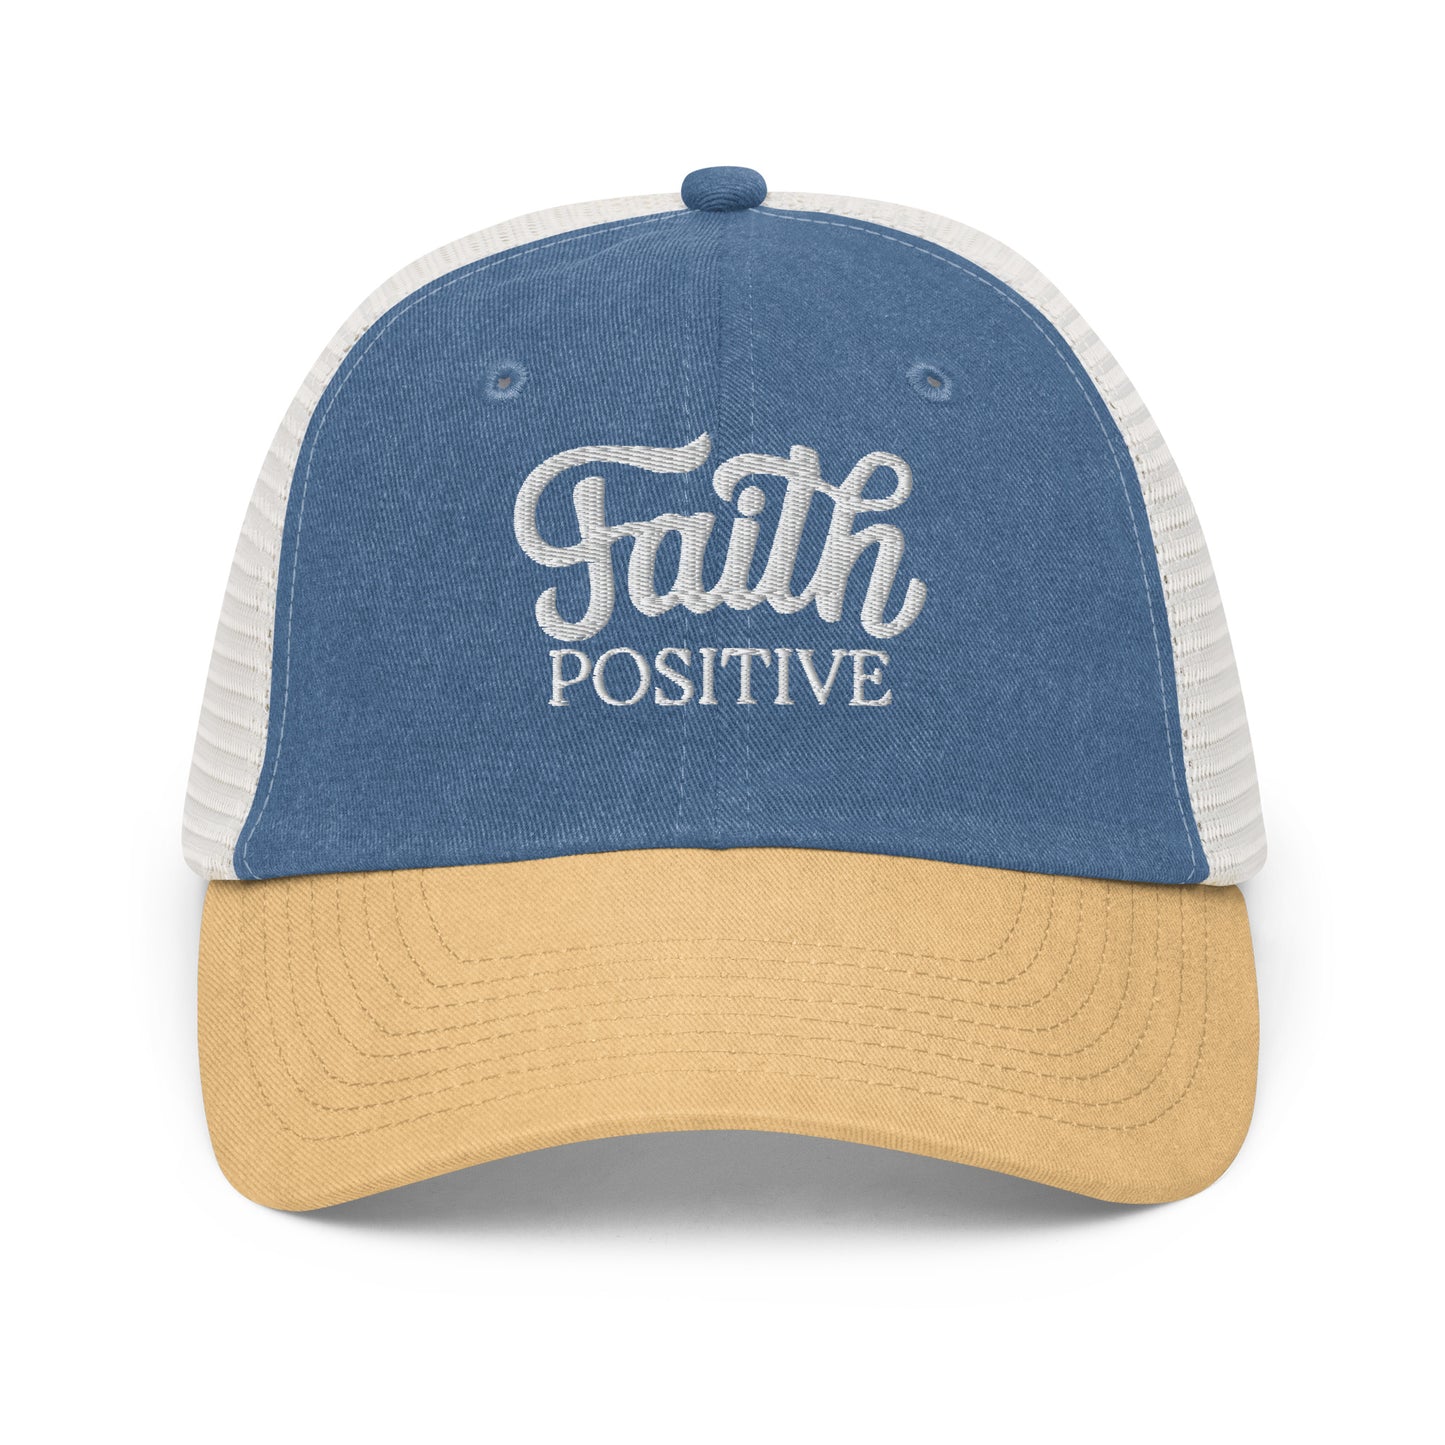 This is the Faith Positive low profile hat. The Faith Positive logo is embroidered on the front with white thread. This hat is pigment dyed, it has a mesh back, blue front and yellow bill. This is the front view of the product.